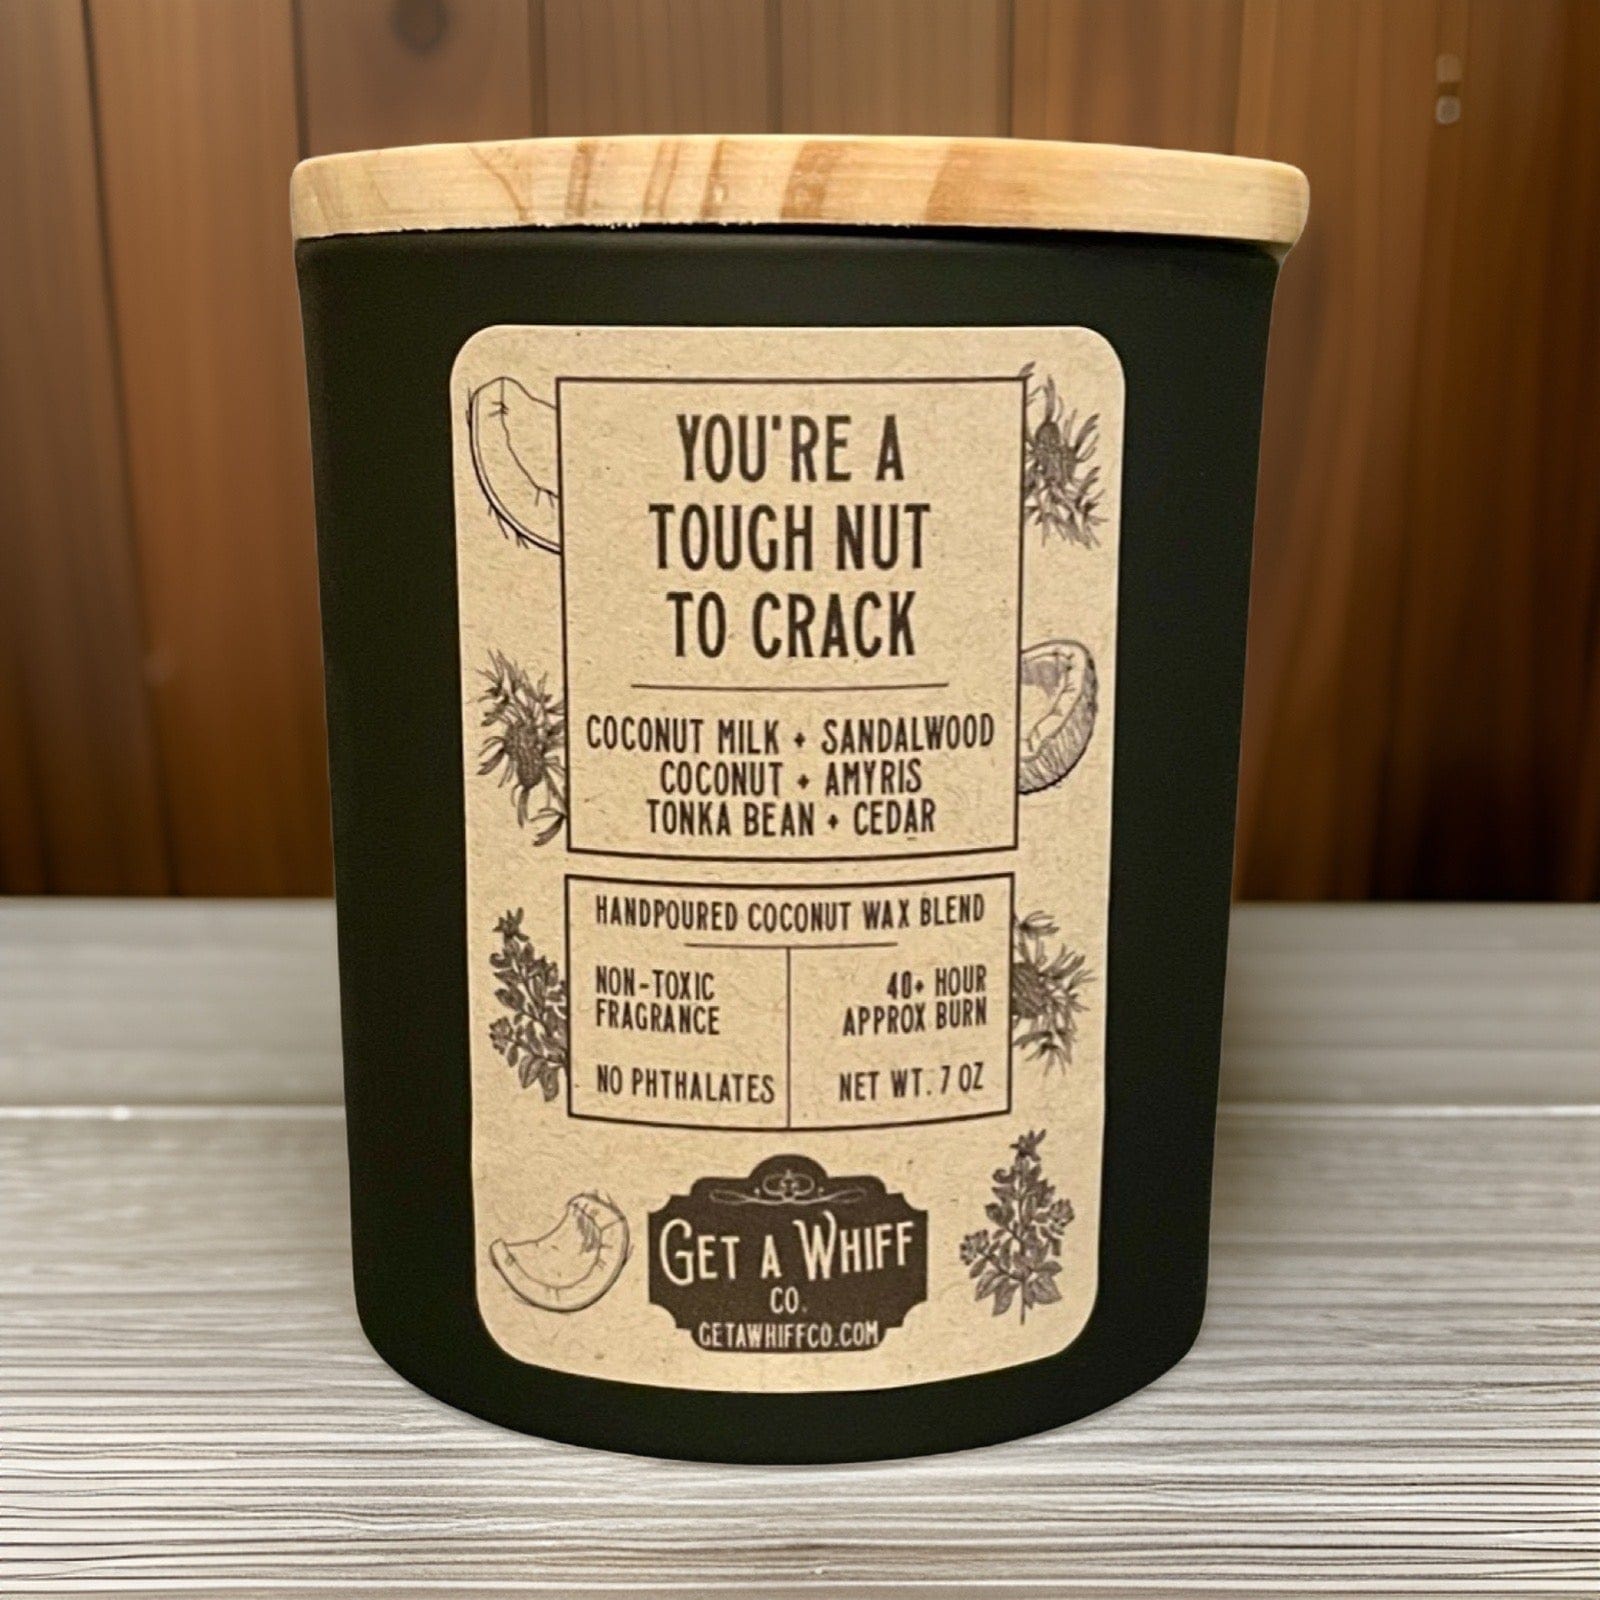 Coconut & Santal Crackling Wooden Wick Scented Candle Made With Coconut Wax (You're A Tough Nut To Crack)